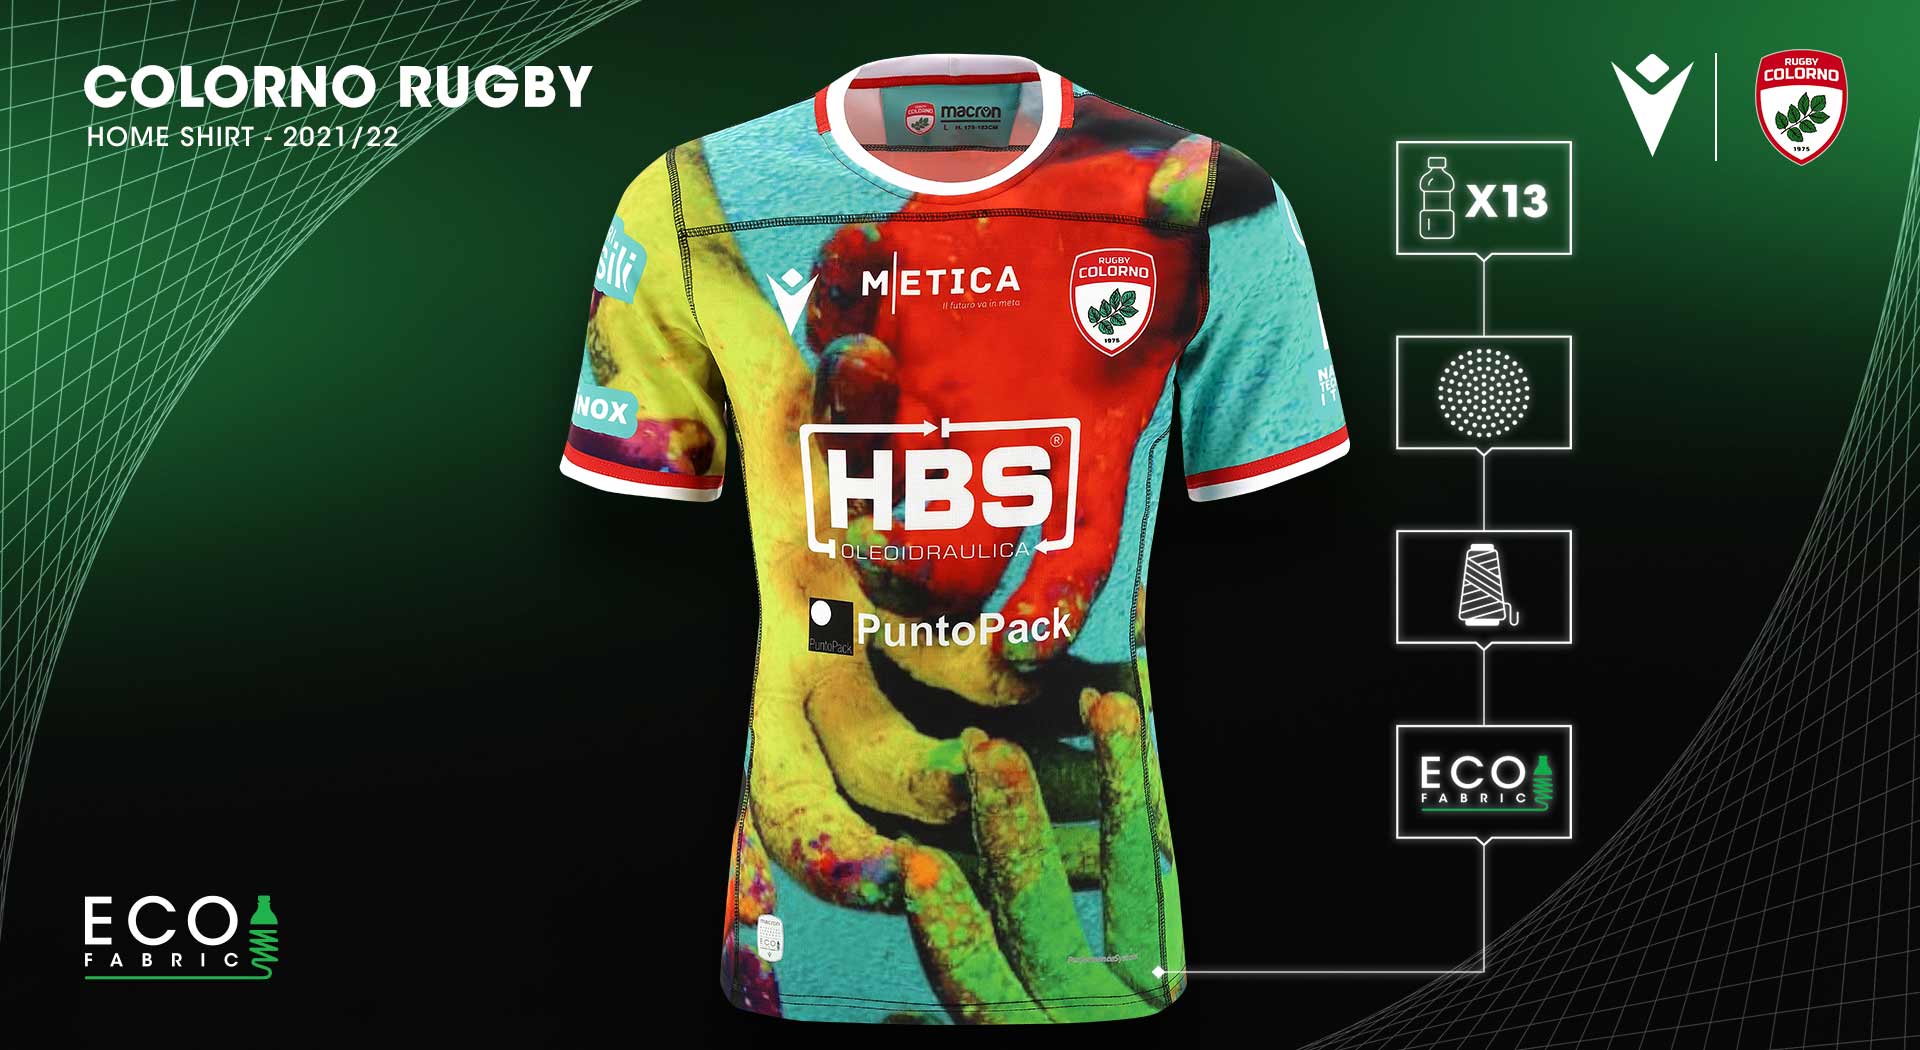 | SOLIDARITY, FEATURING SUSTAINABILITY INCLUSION, SHIRTS EQUALITY MESSAGES THE RUGBY COLORNO OF Versand Weltweiter NEW AND GENDER